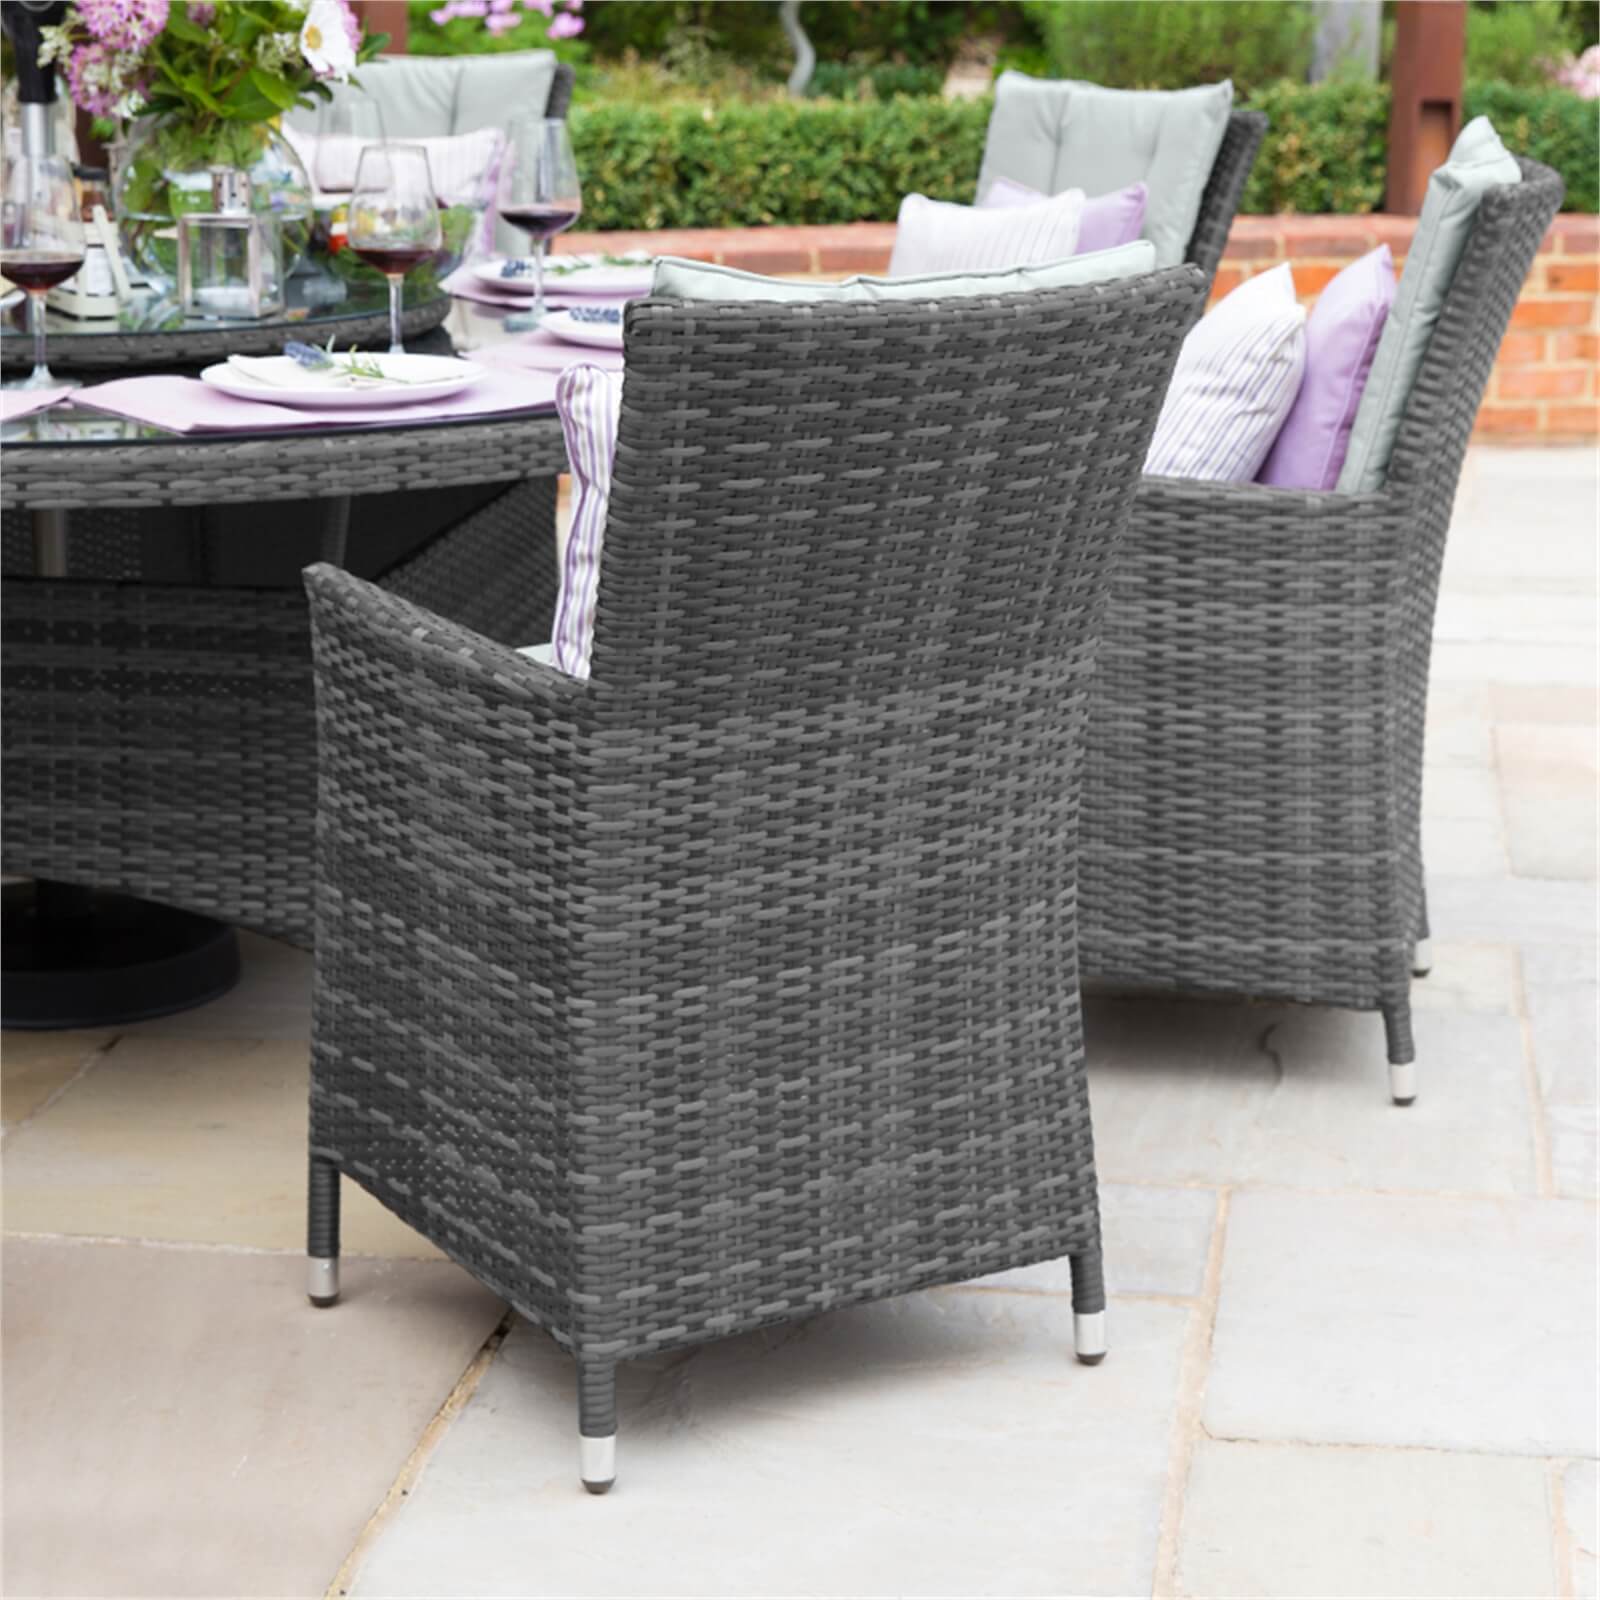 Nova Florence Rattan 6 Seater Oval Dining Set in Grey